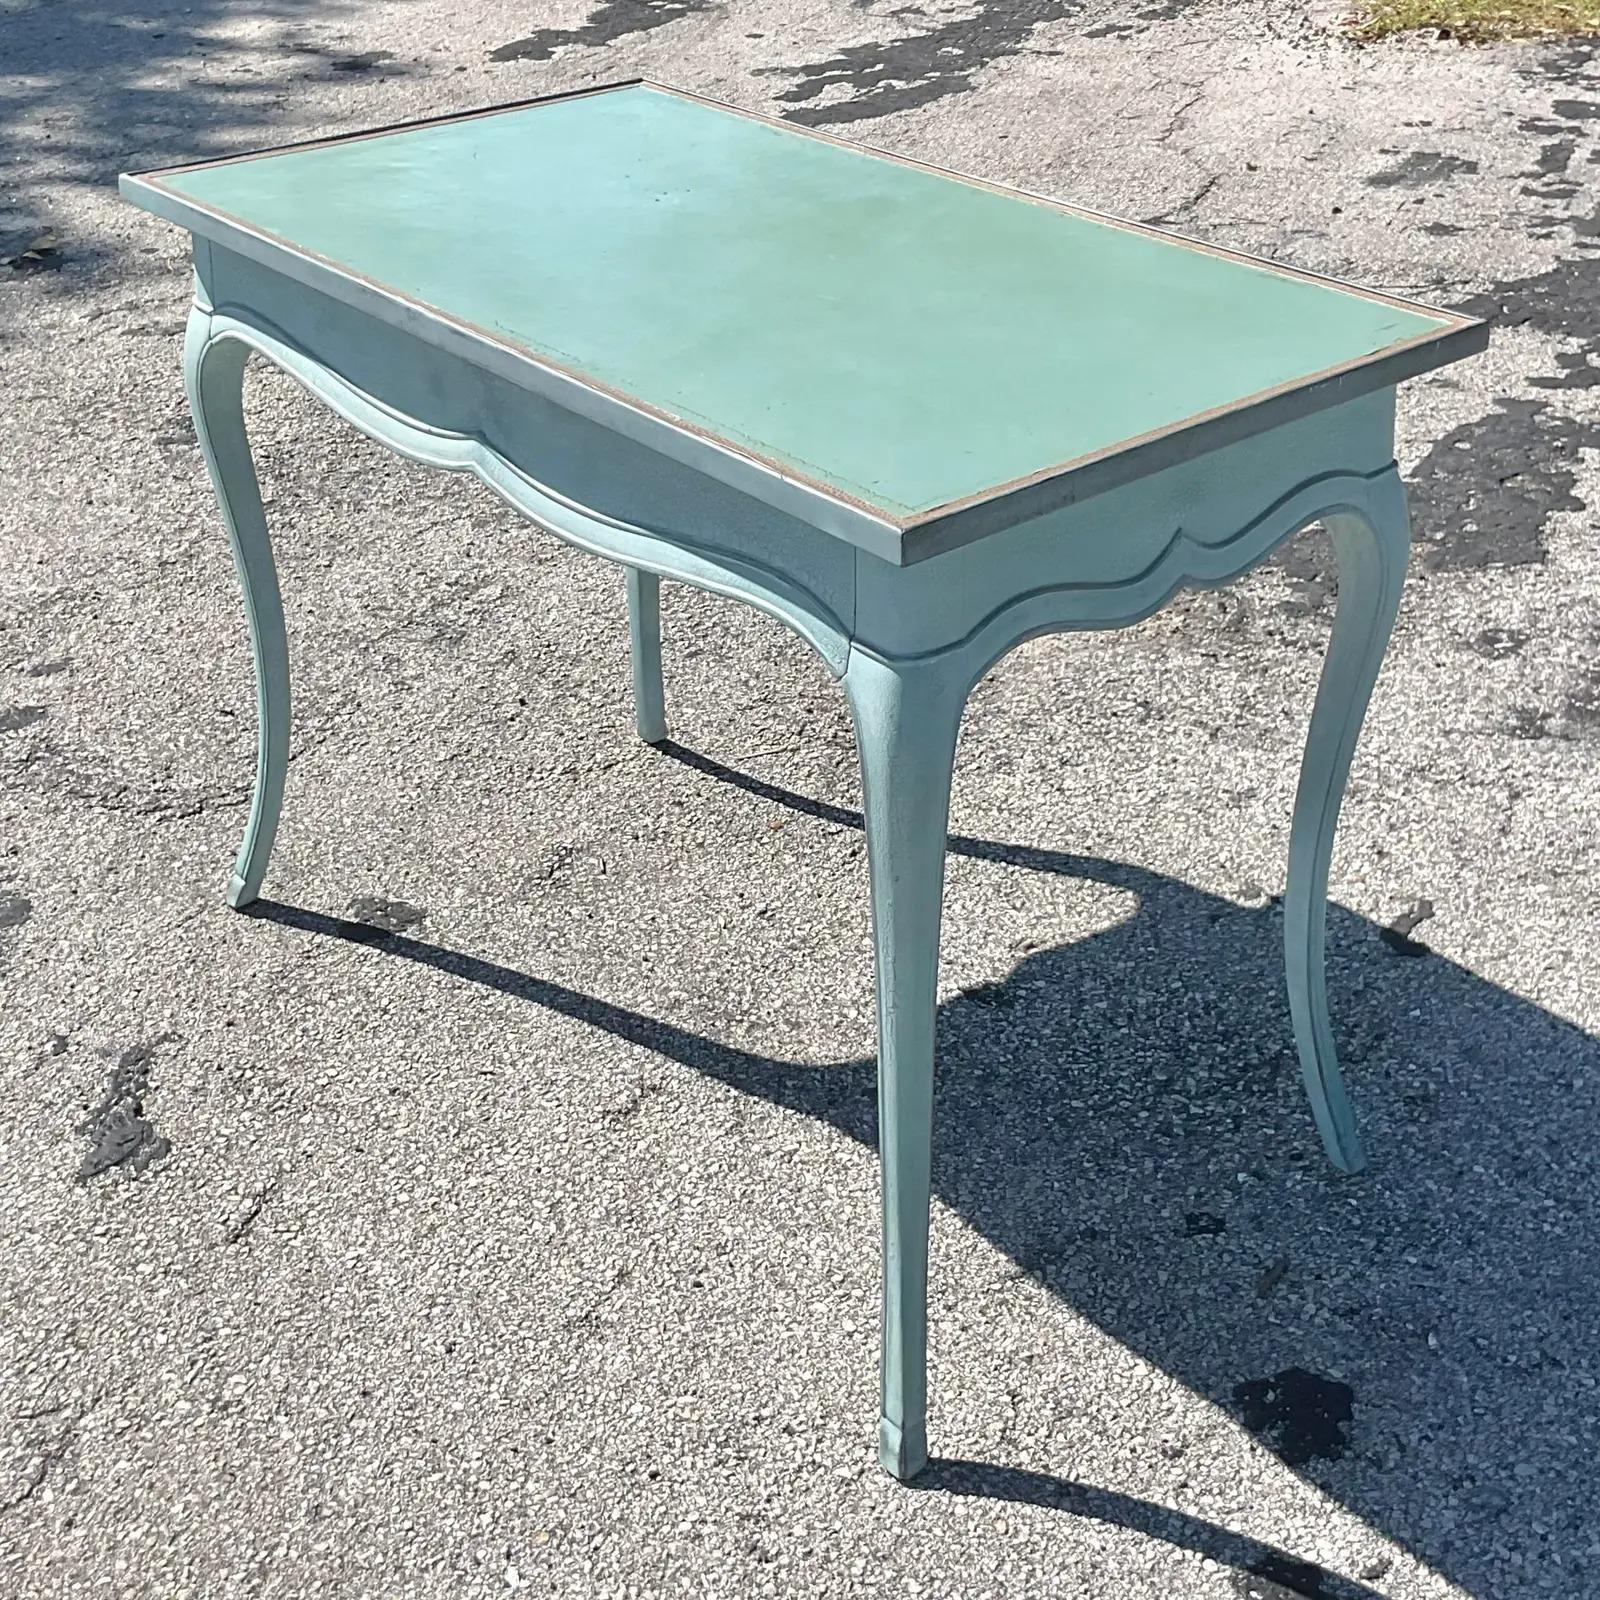 Stunning vintage Regency writing desk. Beautiful cabriolet legs with a chic scalloped trim. Inset leather top with gold leaf detail. The most gorgeous bright blue. Acquired from a Palm Beach estate.

The desk is in great vintage condition. Minor